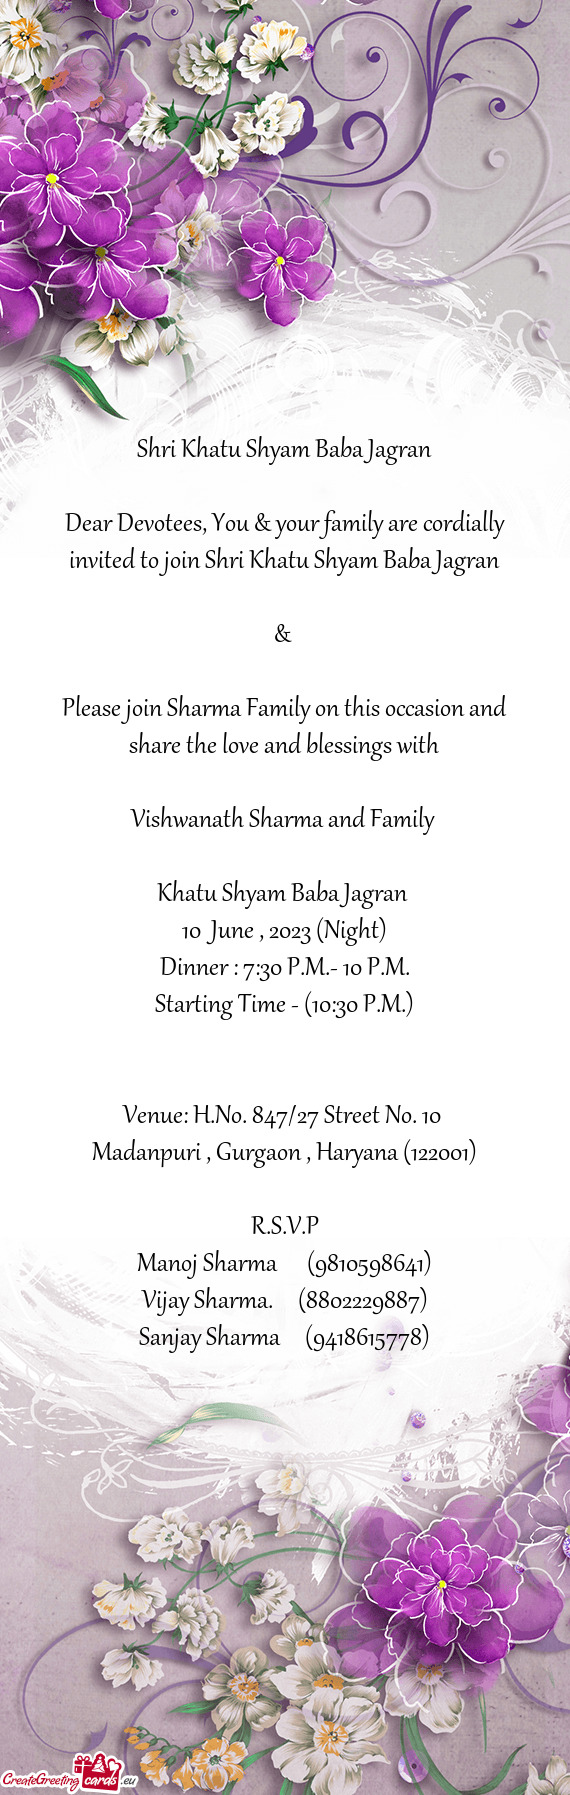 Please join Sharma Family on this occasion and share the love and blessings with